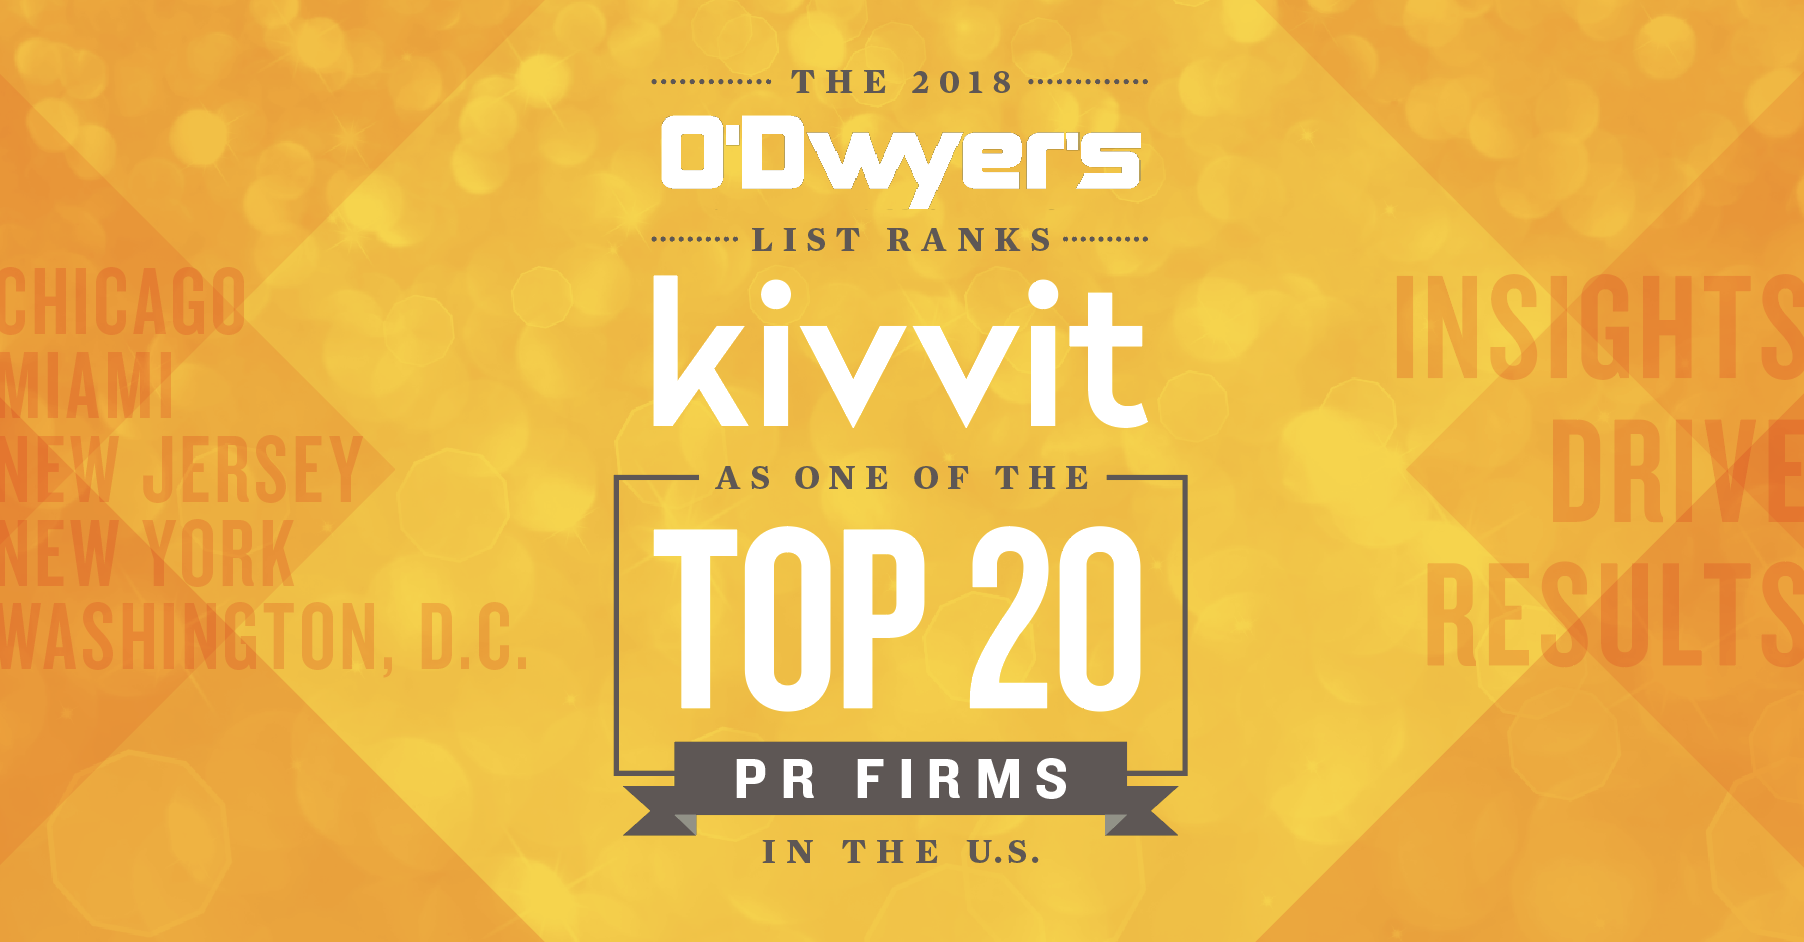 Image reads the 2018 O'Dwyers list ranks Kivvit as on of the Top 20 PR Firms